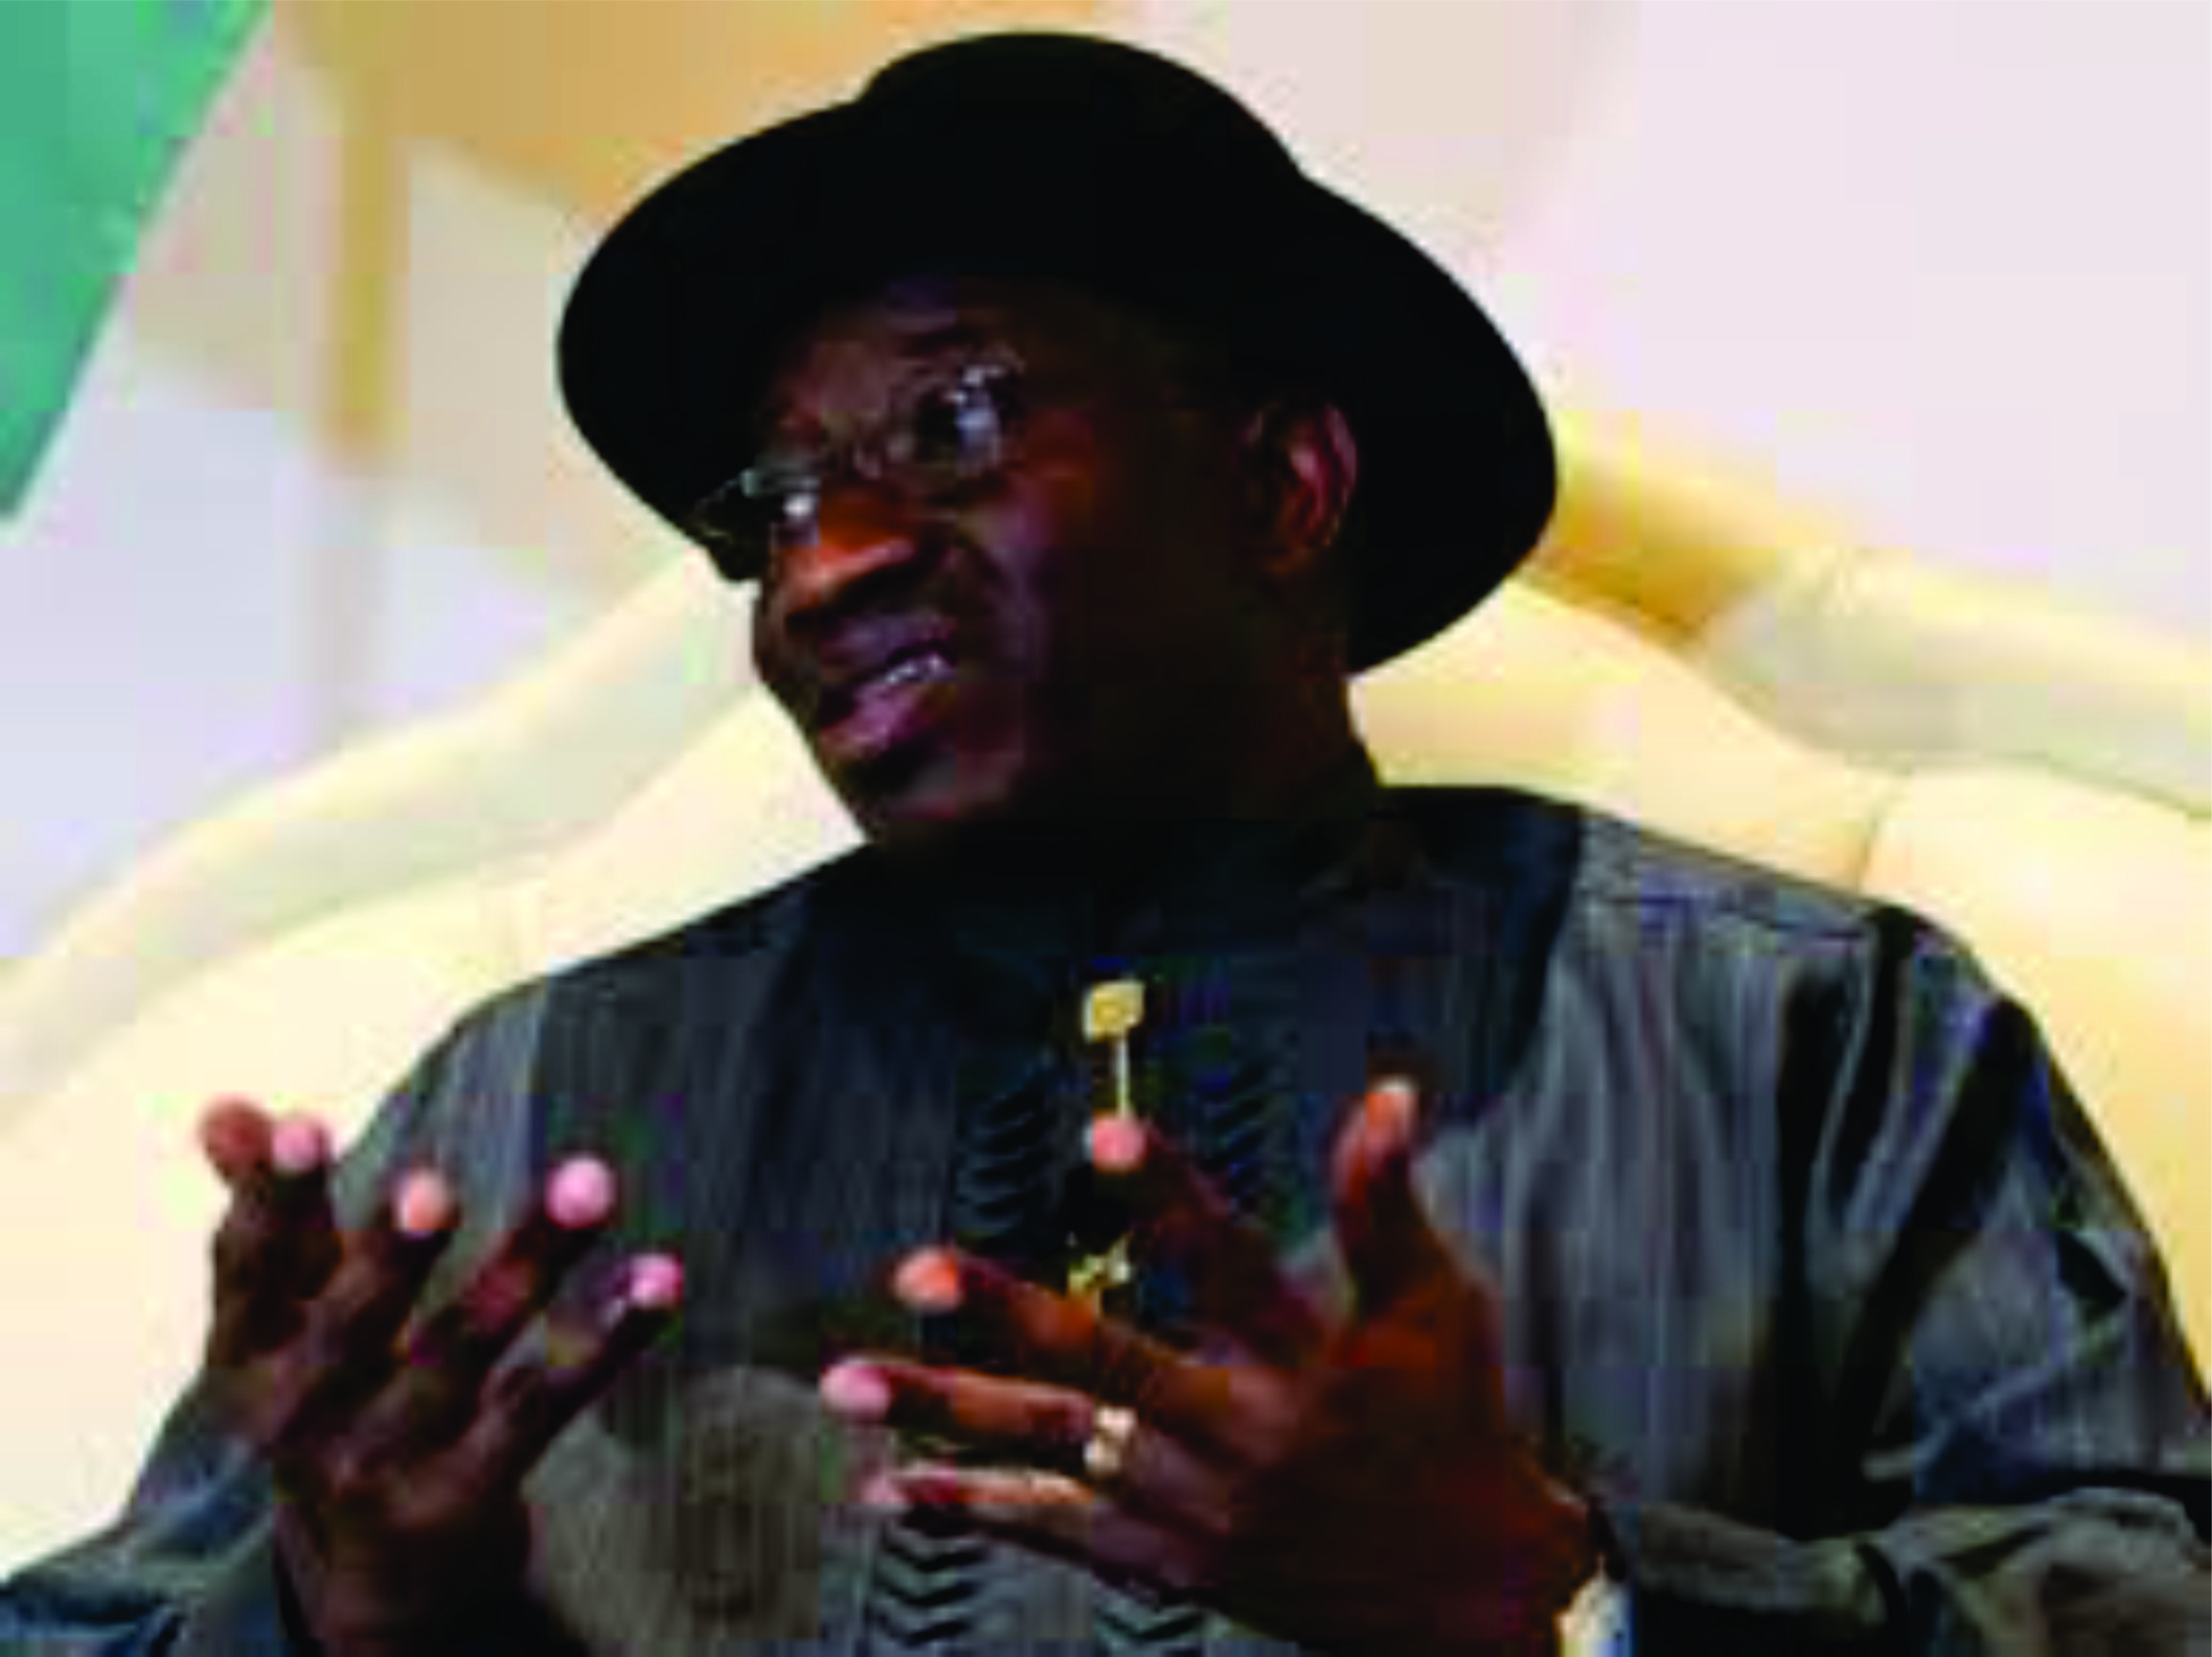 Campaign Of Calumny Against Me Aimed To Smear Me – Jonathan